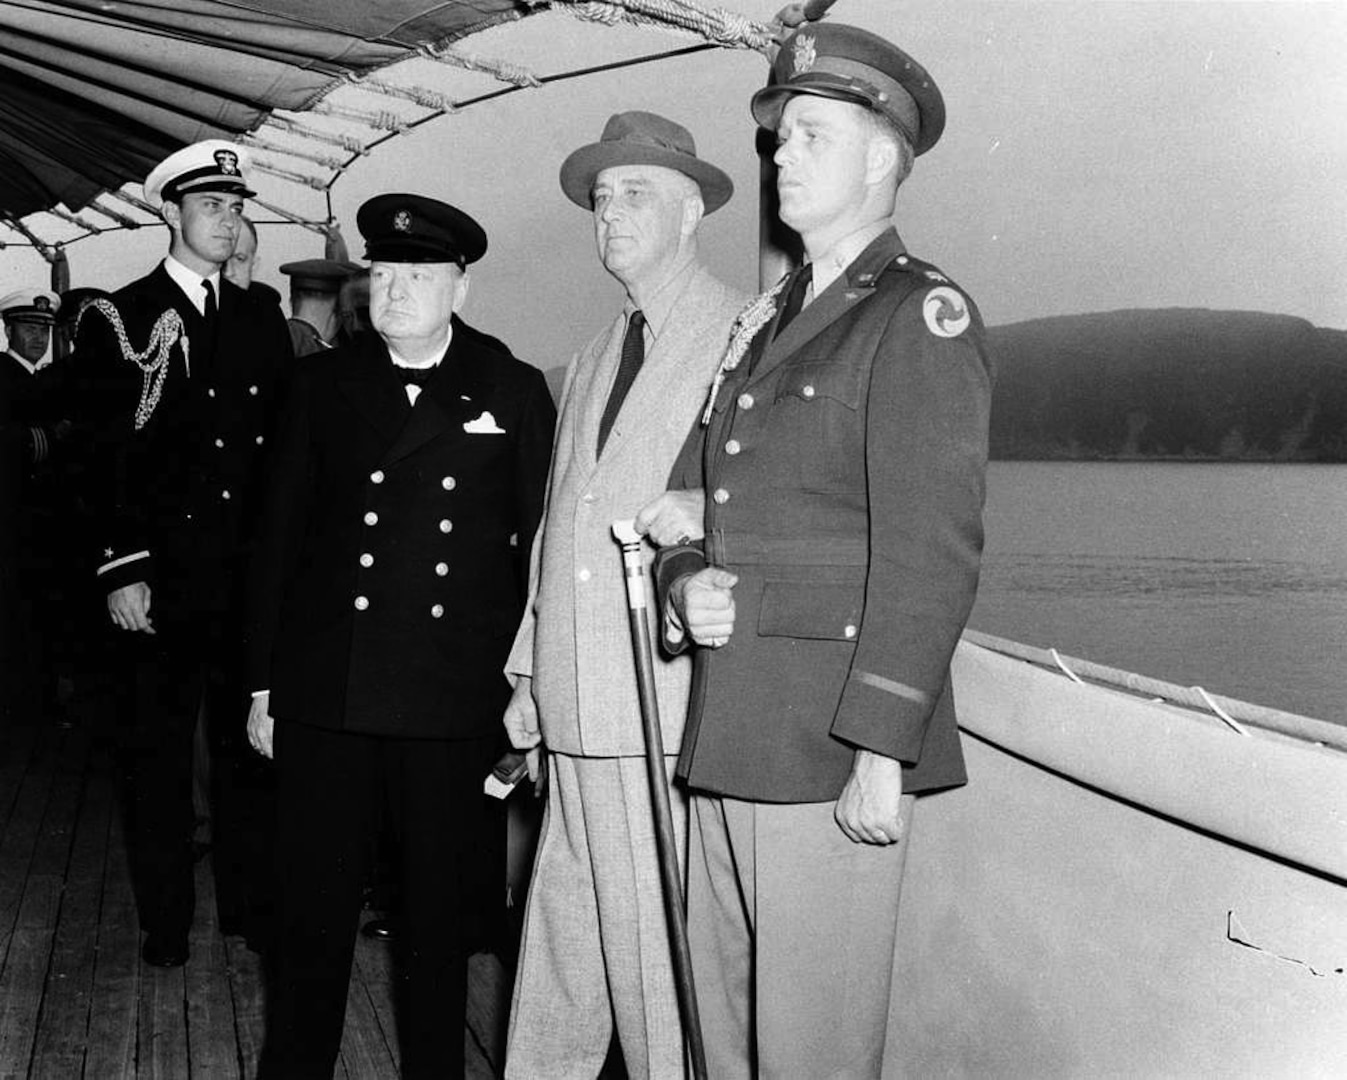 Prime Minister Winston Churchill meets with PresidentFranklin D. Roosevelt on board the U.S. Navy heavy cruiserUSS Augusta (CA-31), off Argentia, Newfoundland, onAugust 9, 1941 (Naval History and Heritage Command)